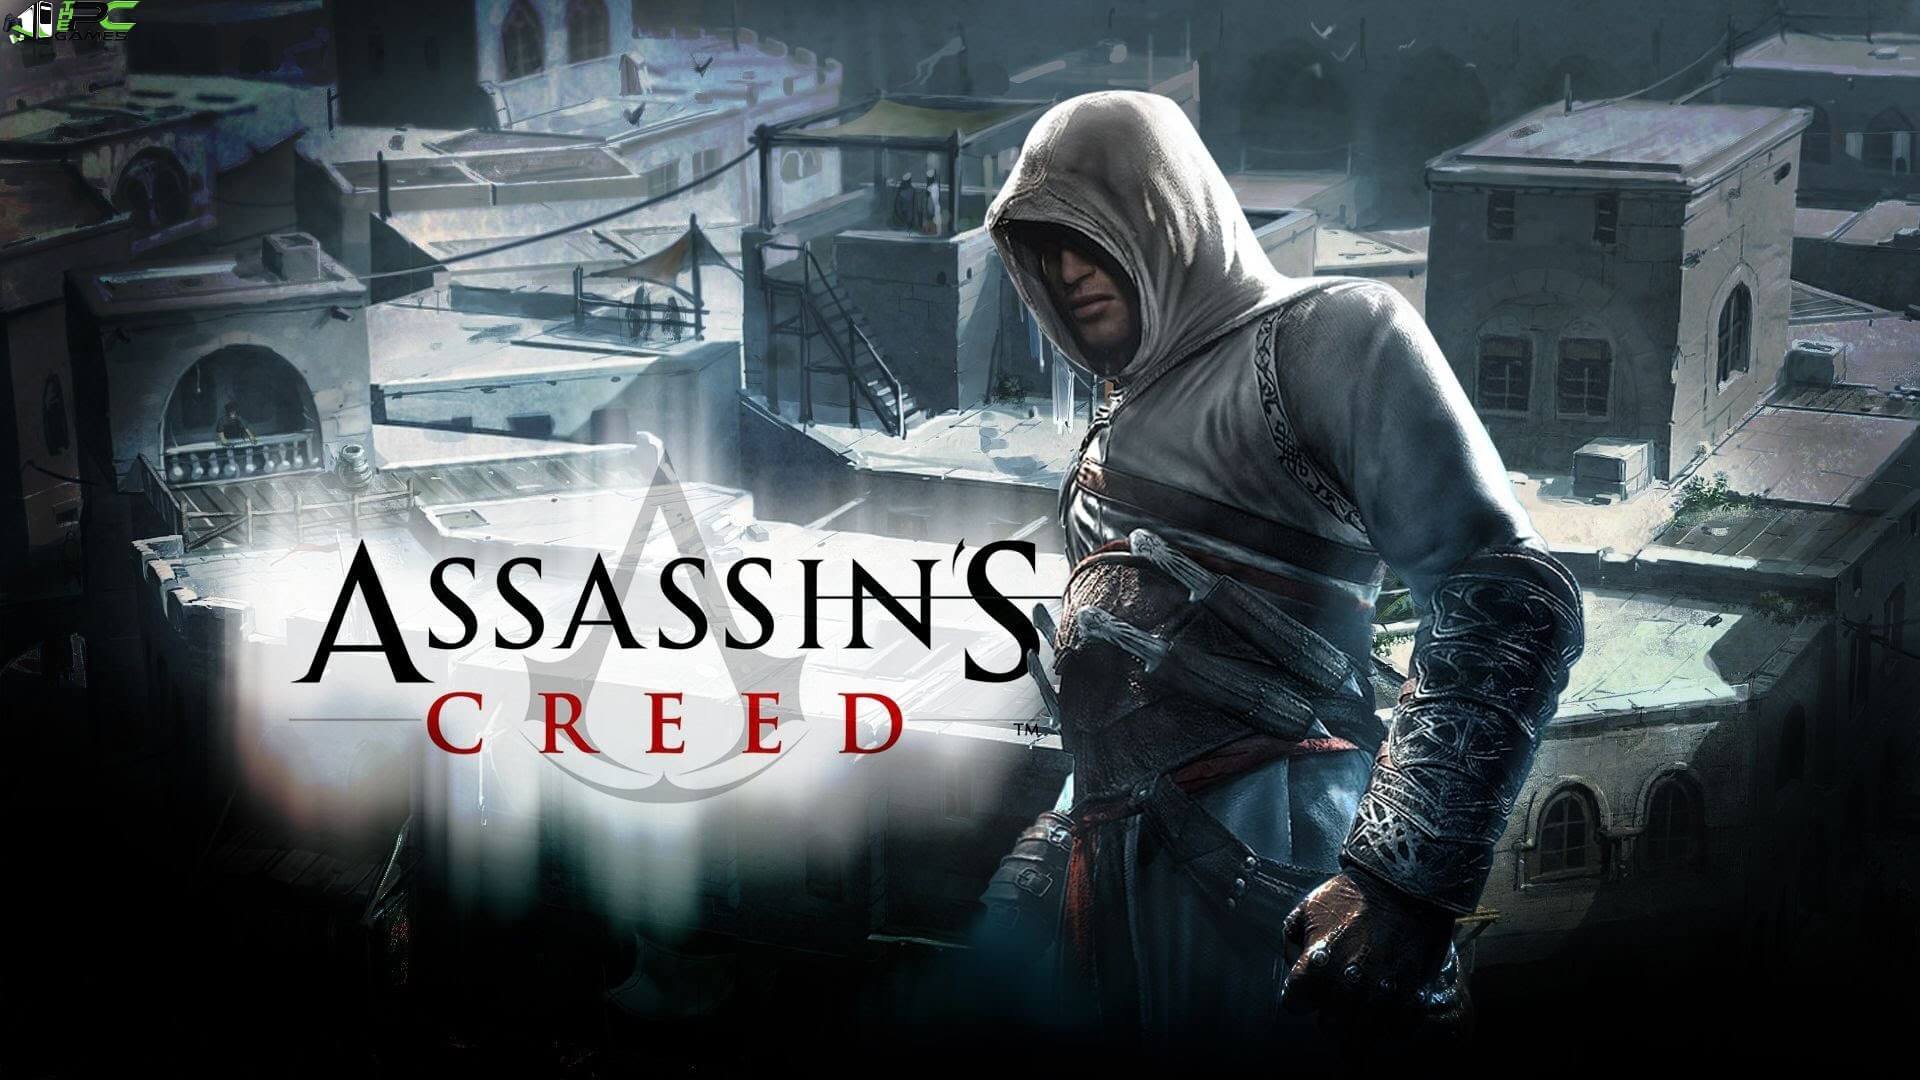 Buy Assassins Creed Directors Cut Edition for PC